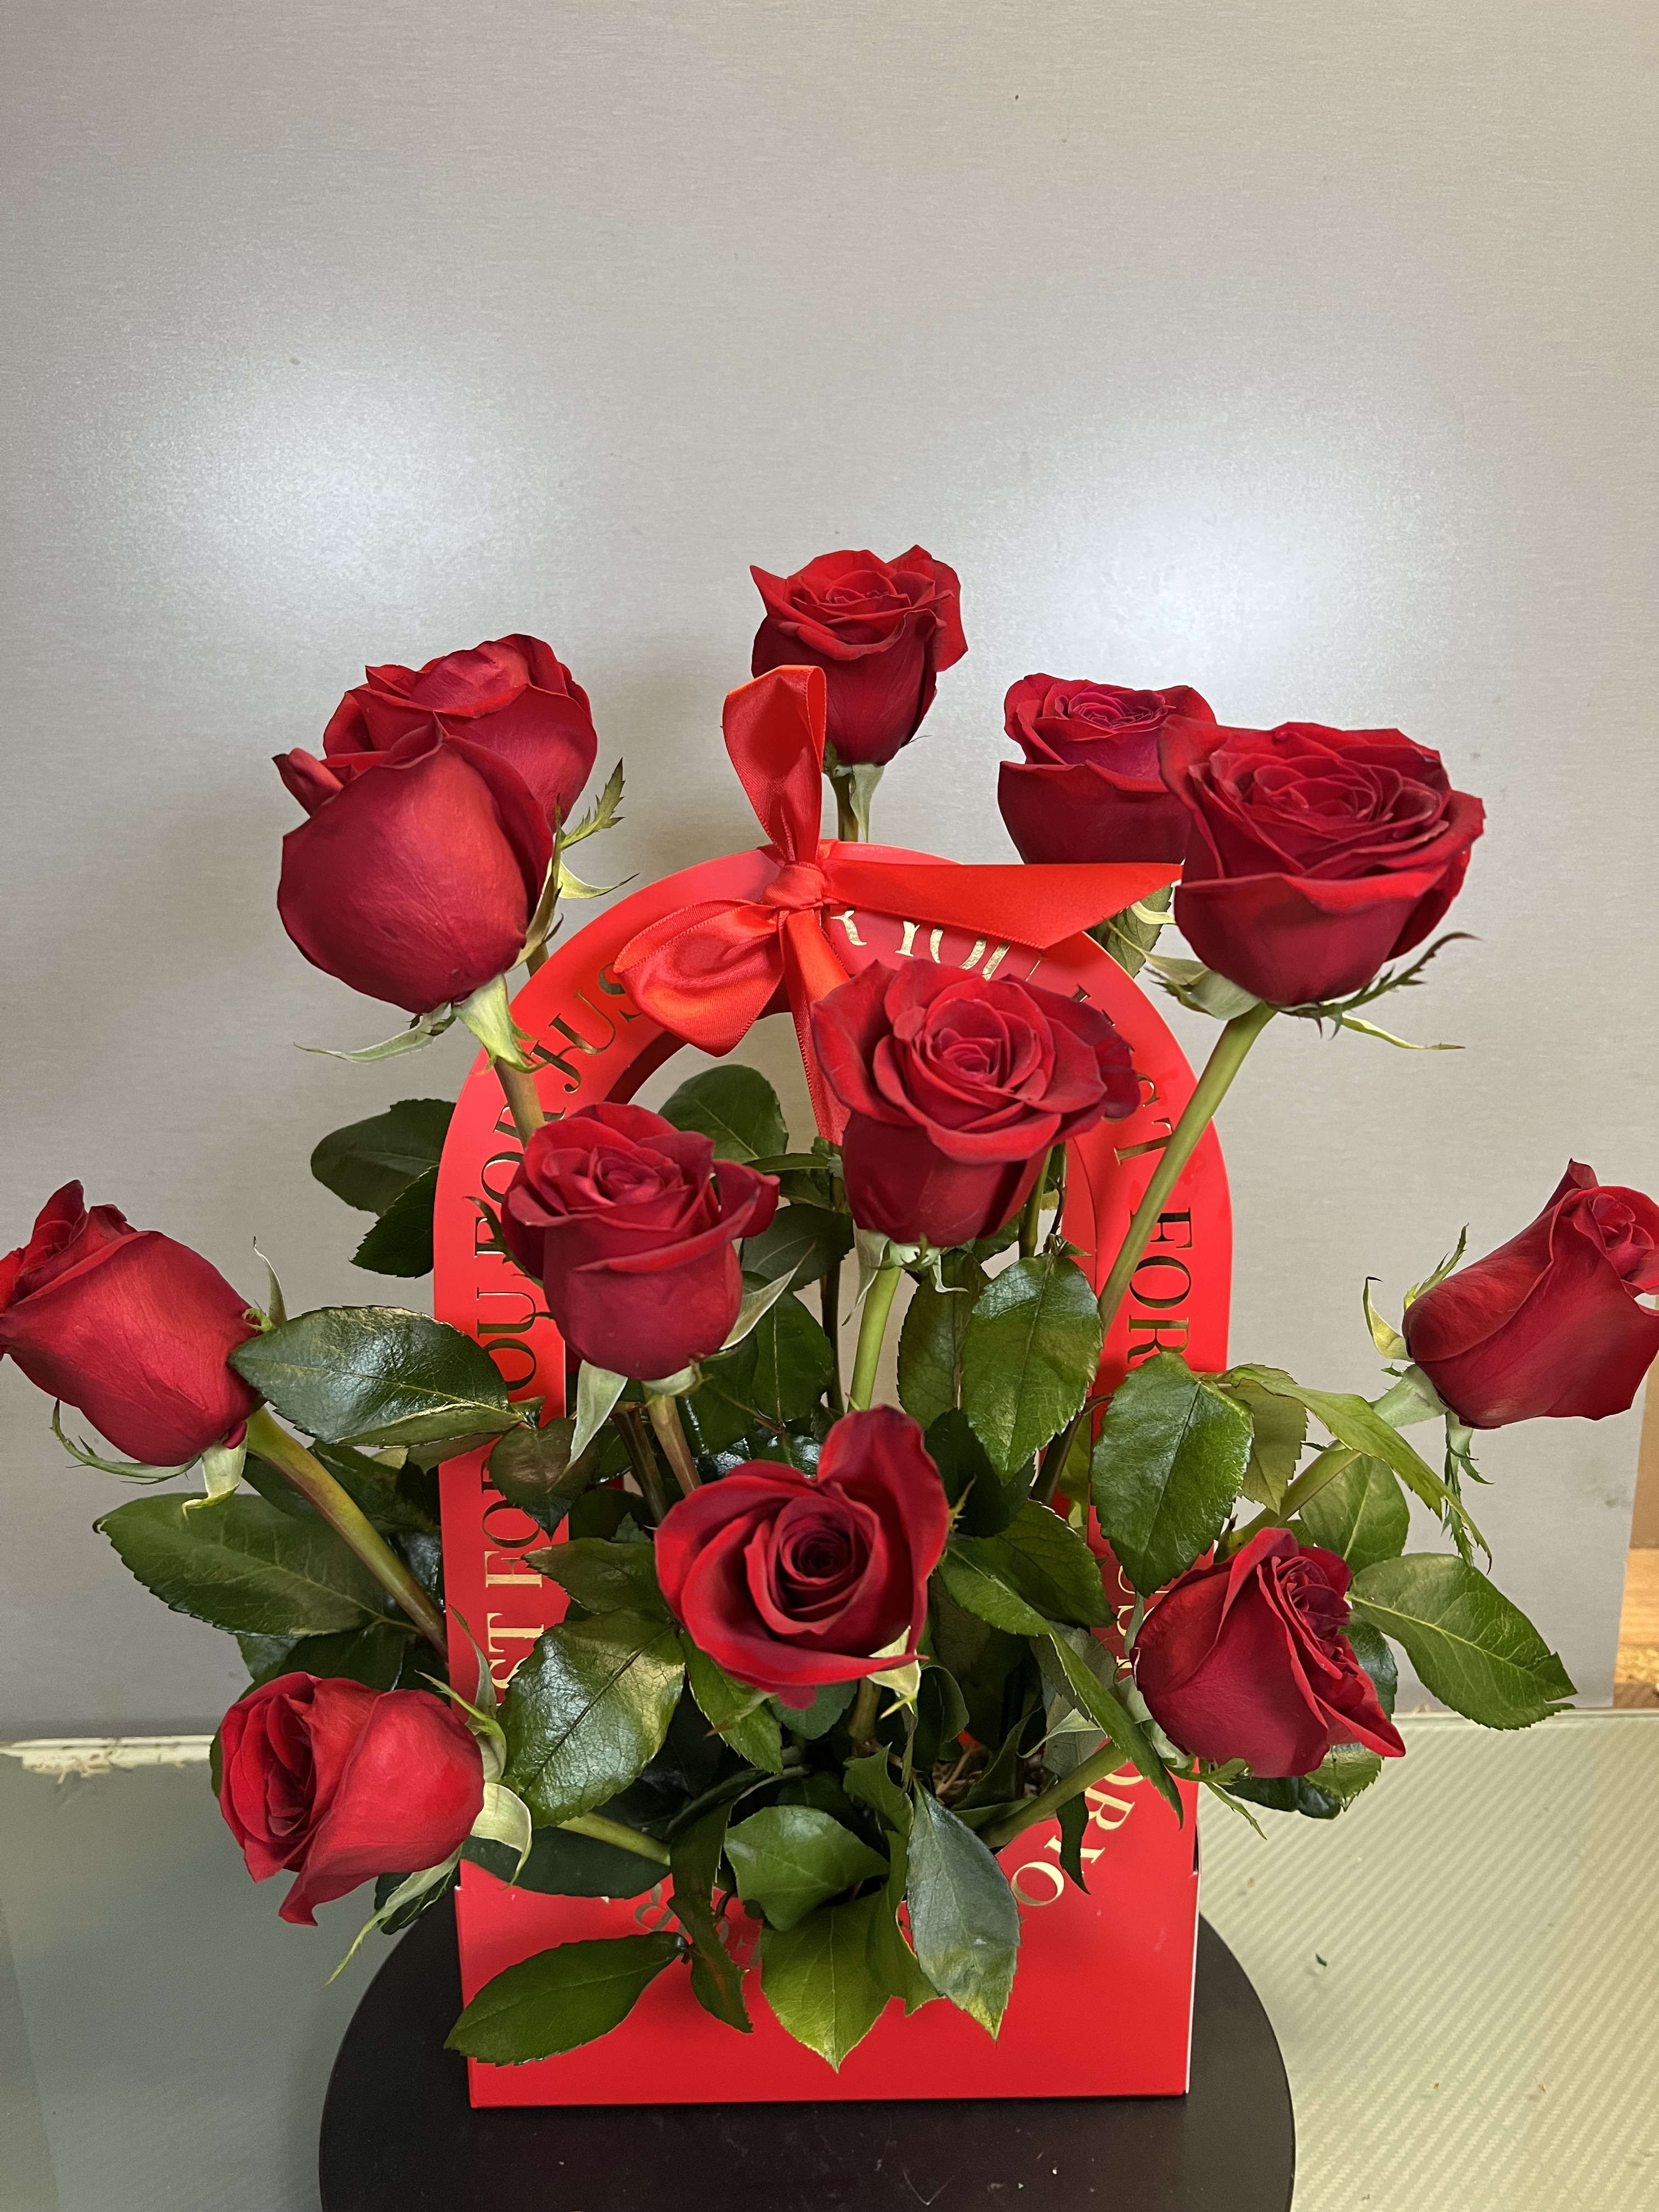 SWEET ROSES - 12 Stems Ecuadorian Roses AS SIMILAR AS POSSIBLE Substitution based on season, flowers availability or any unforeseen or uncontrollable circumstances 